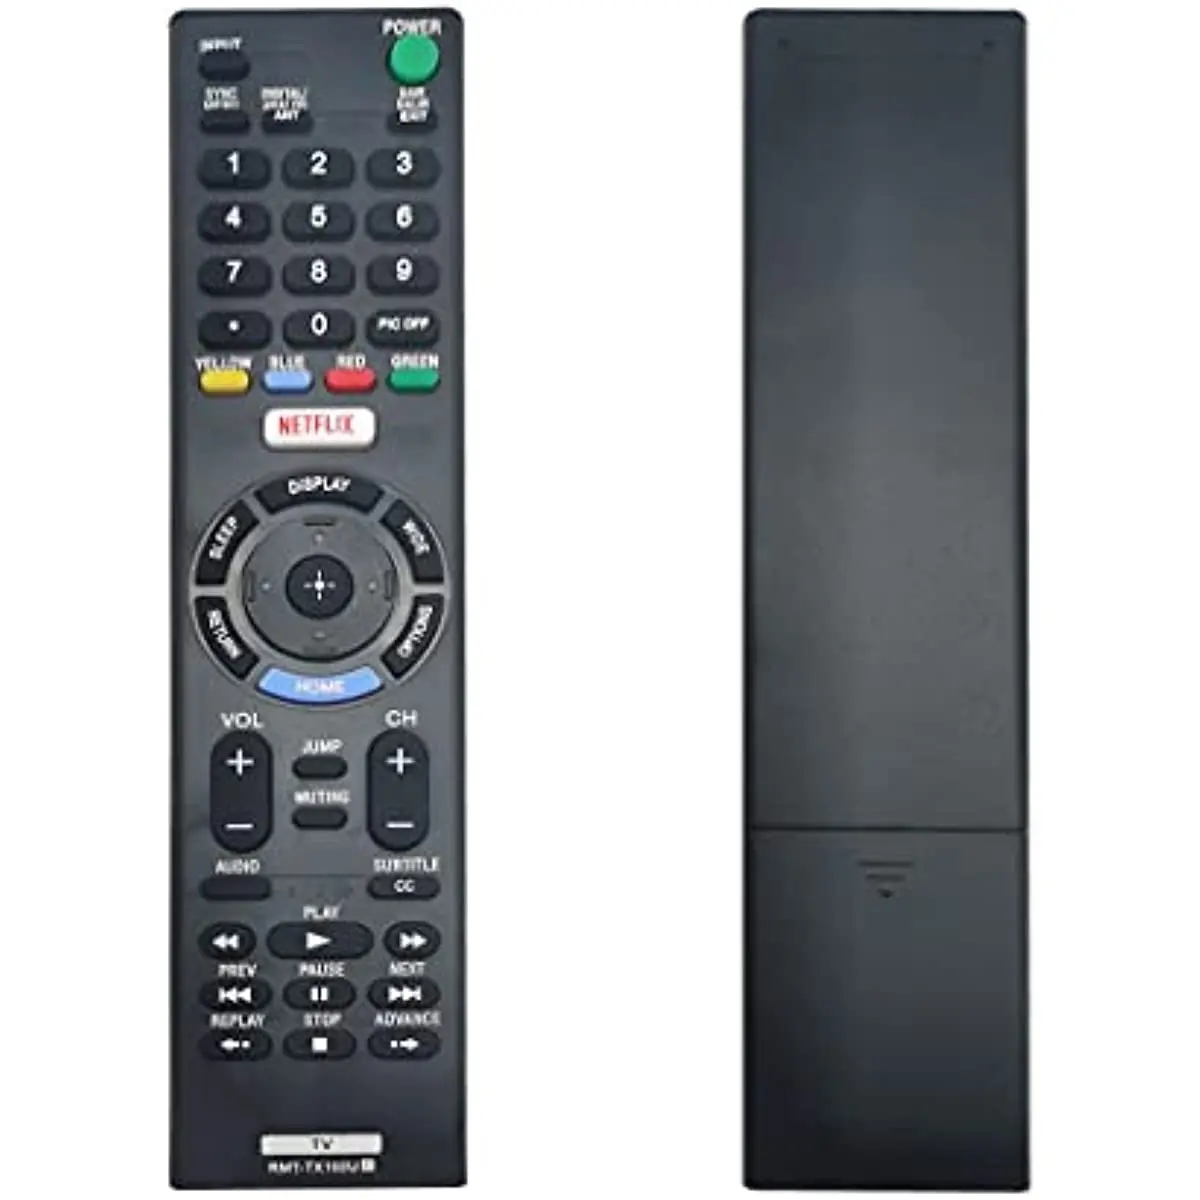 

Replacement RMT-TX102U Remote Sony for Sony TV RMT-TX102U RMT-TX100D RMT-TX200U RMT-TX300U RMT-TX200E RMT-TX300E